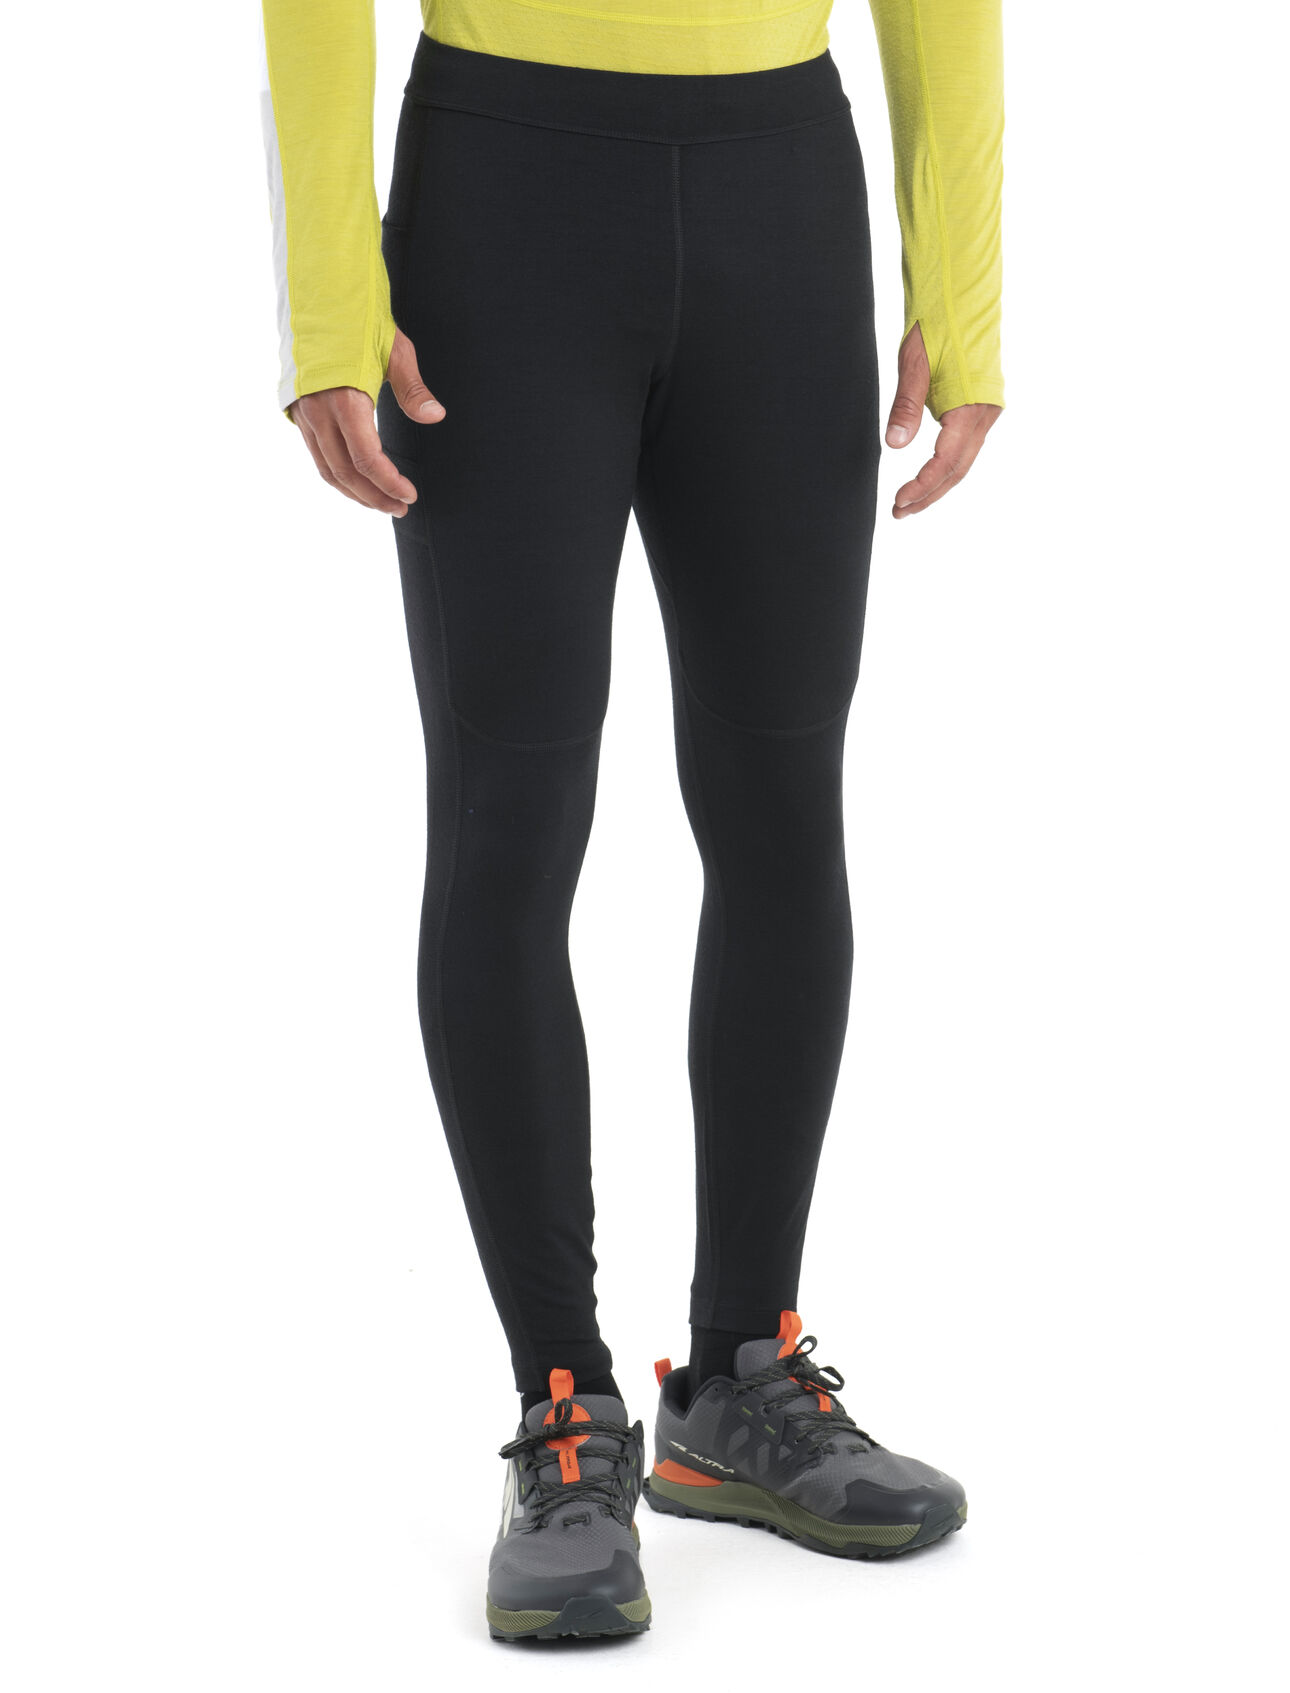 Under Armour Training Cold Gear leggings in black